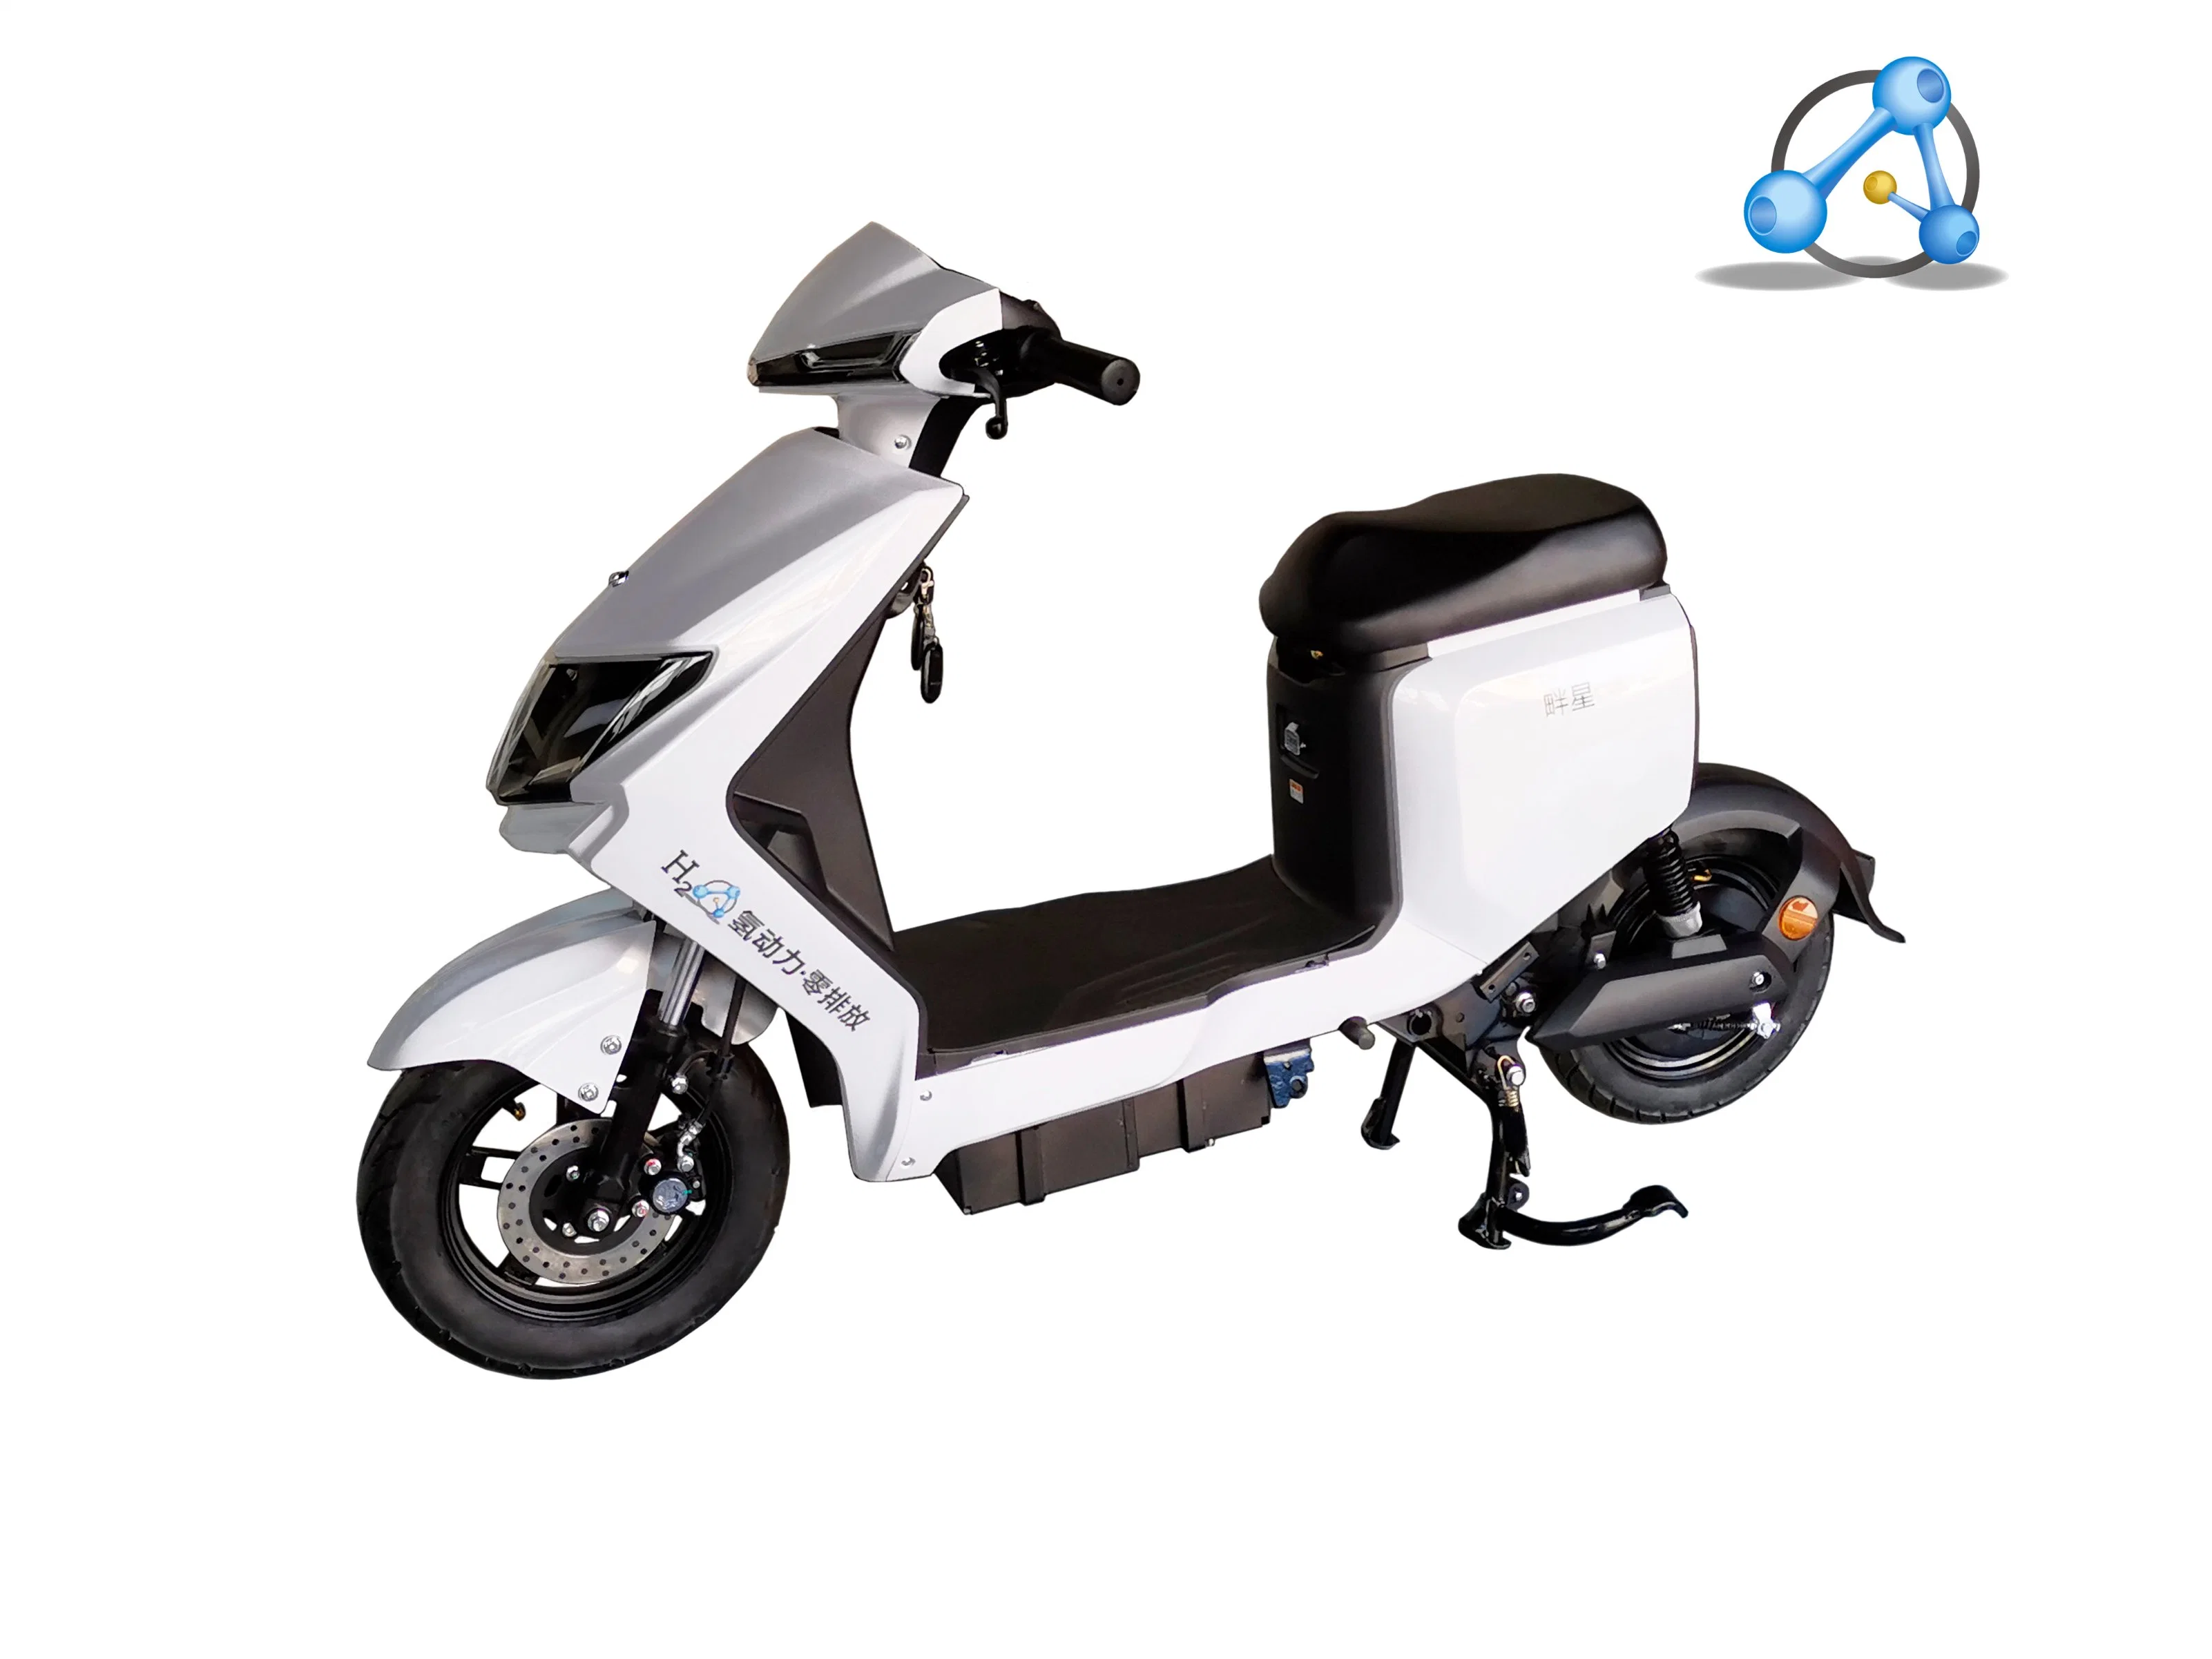 Wholesale Clean Energy Hydrogen Motorcycle Moped Hydrogen Fuel Cell Scooter